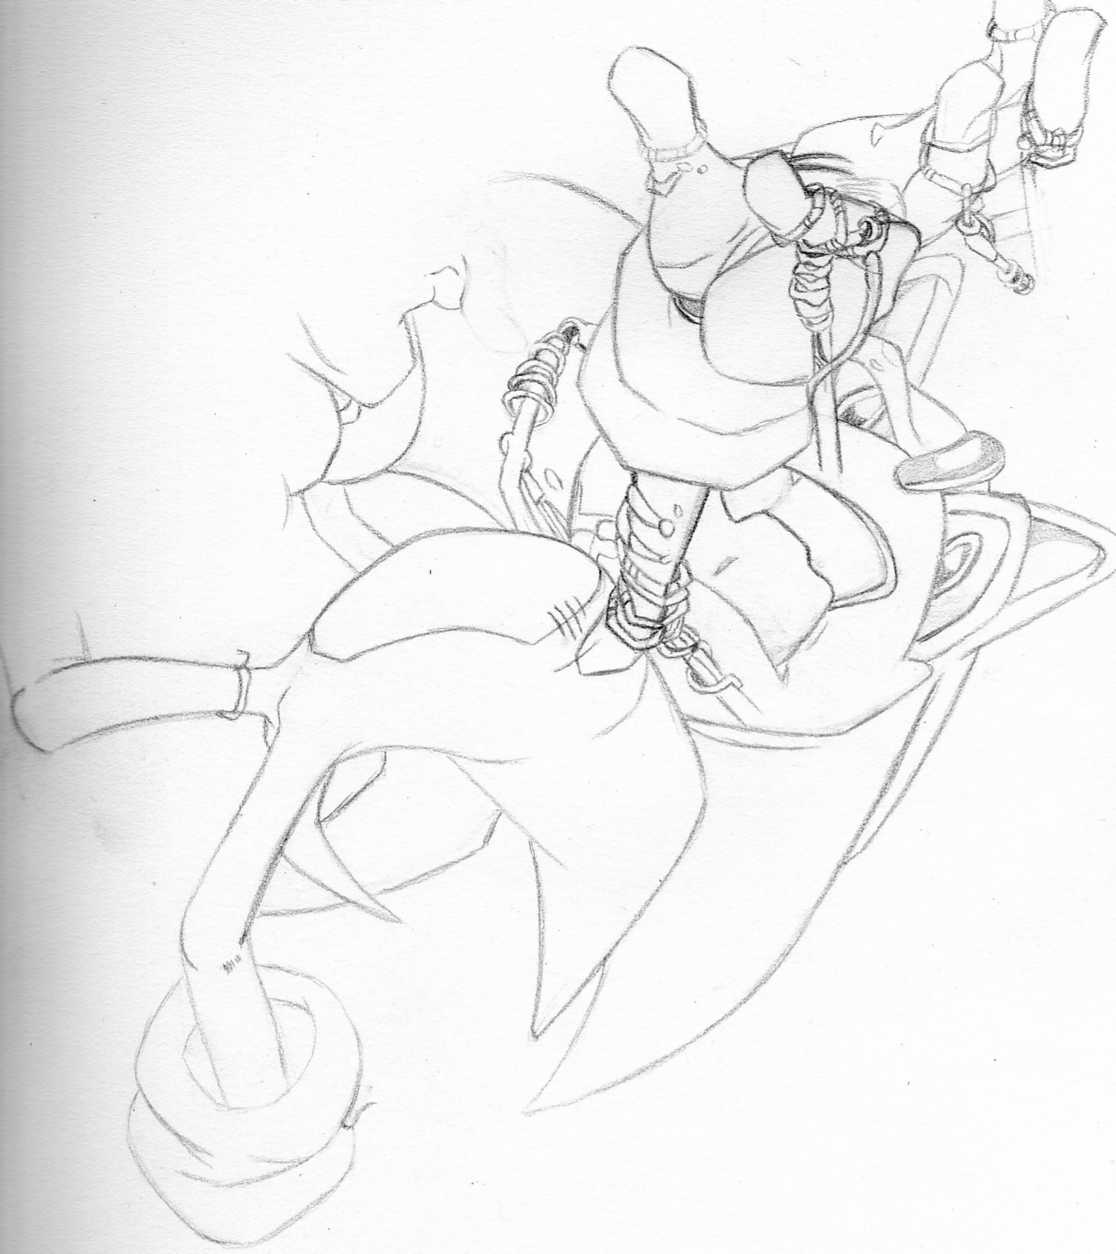 Sonic Tangled (unfinished gift and sketch) also a project by sonicknuxfans